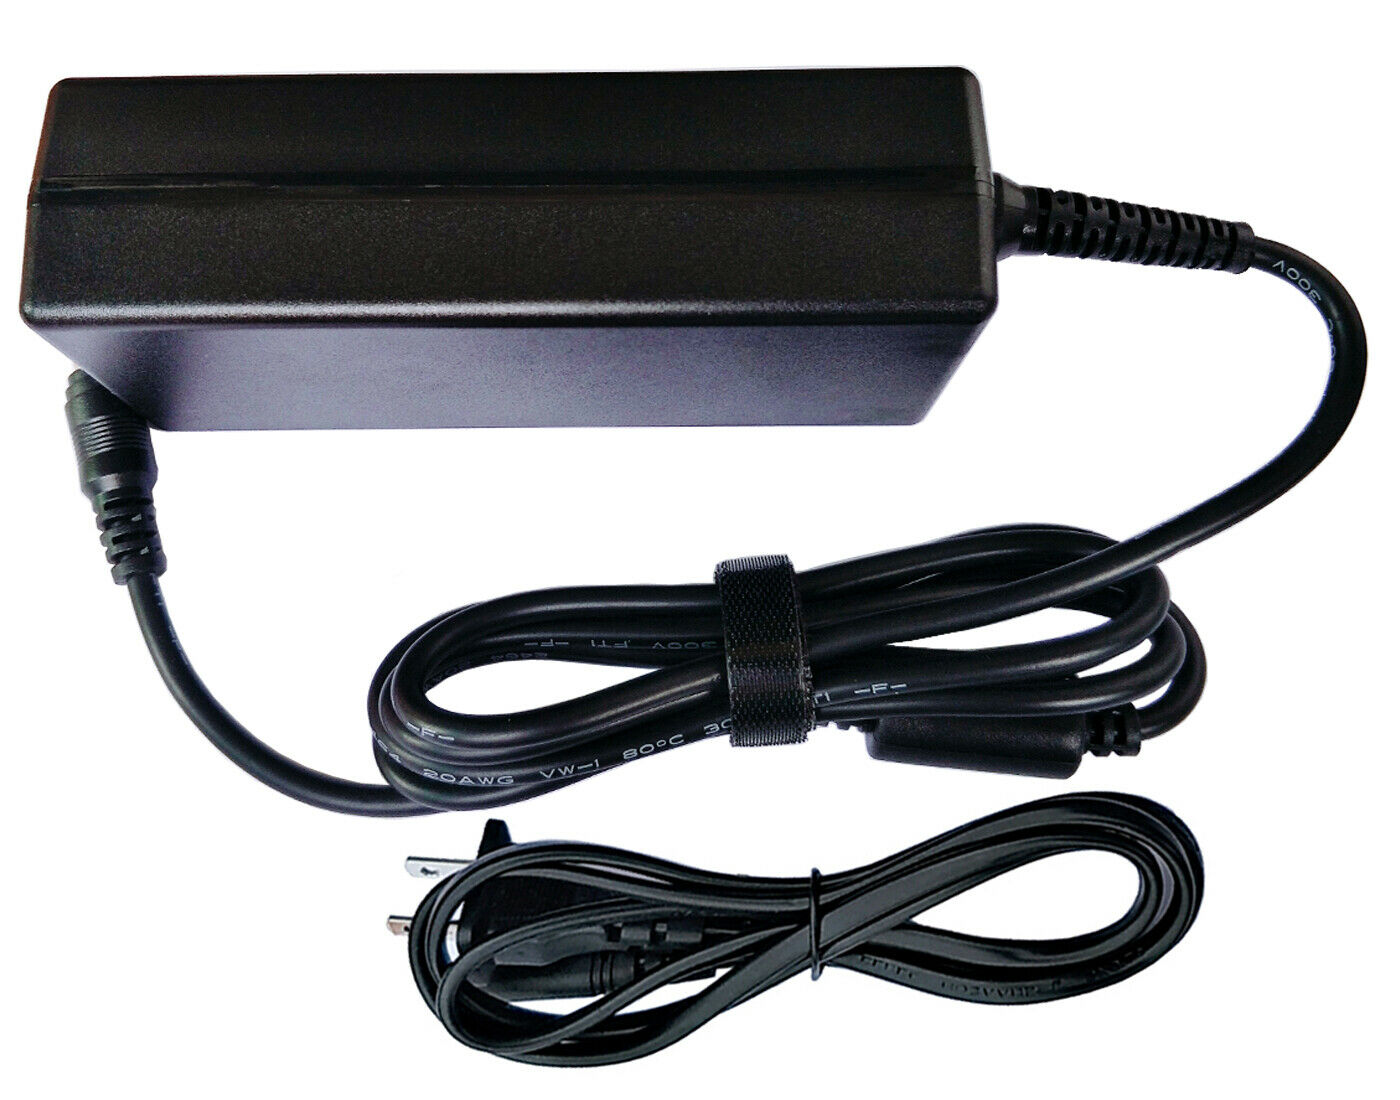 12V AC Adapter For Belkin F4U055WW Thunderbolt Express Dock Power Supply Charger Technical Specific - Click Image to Close